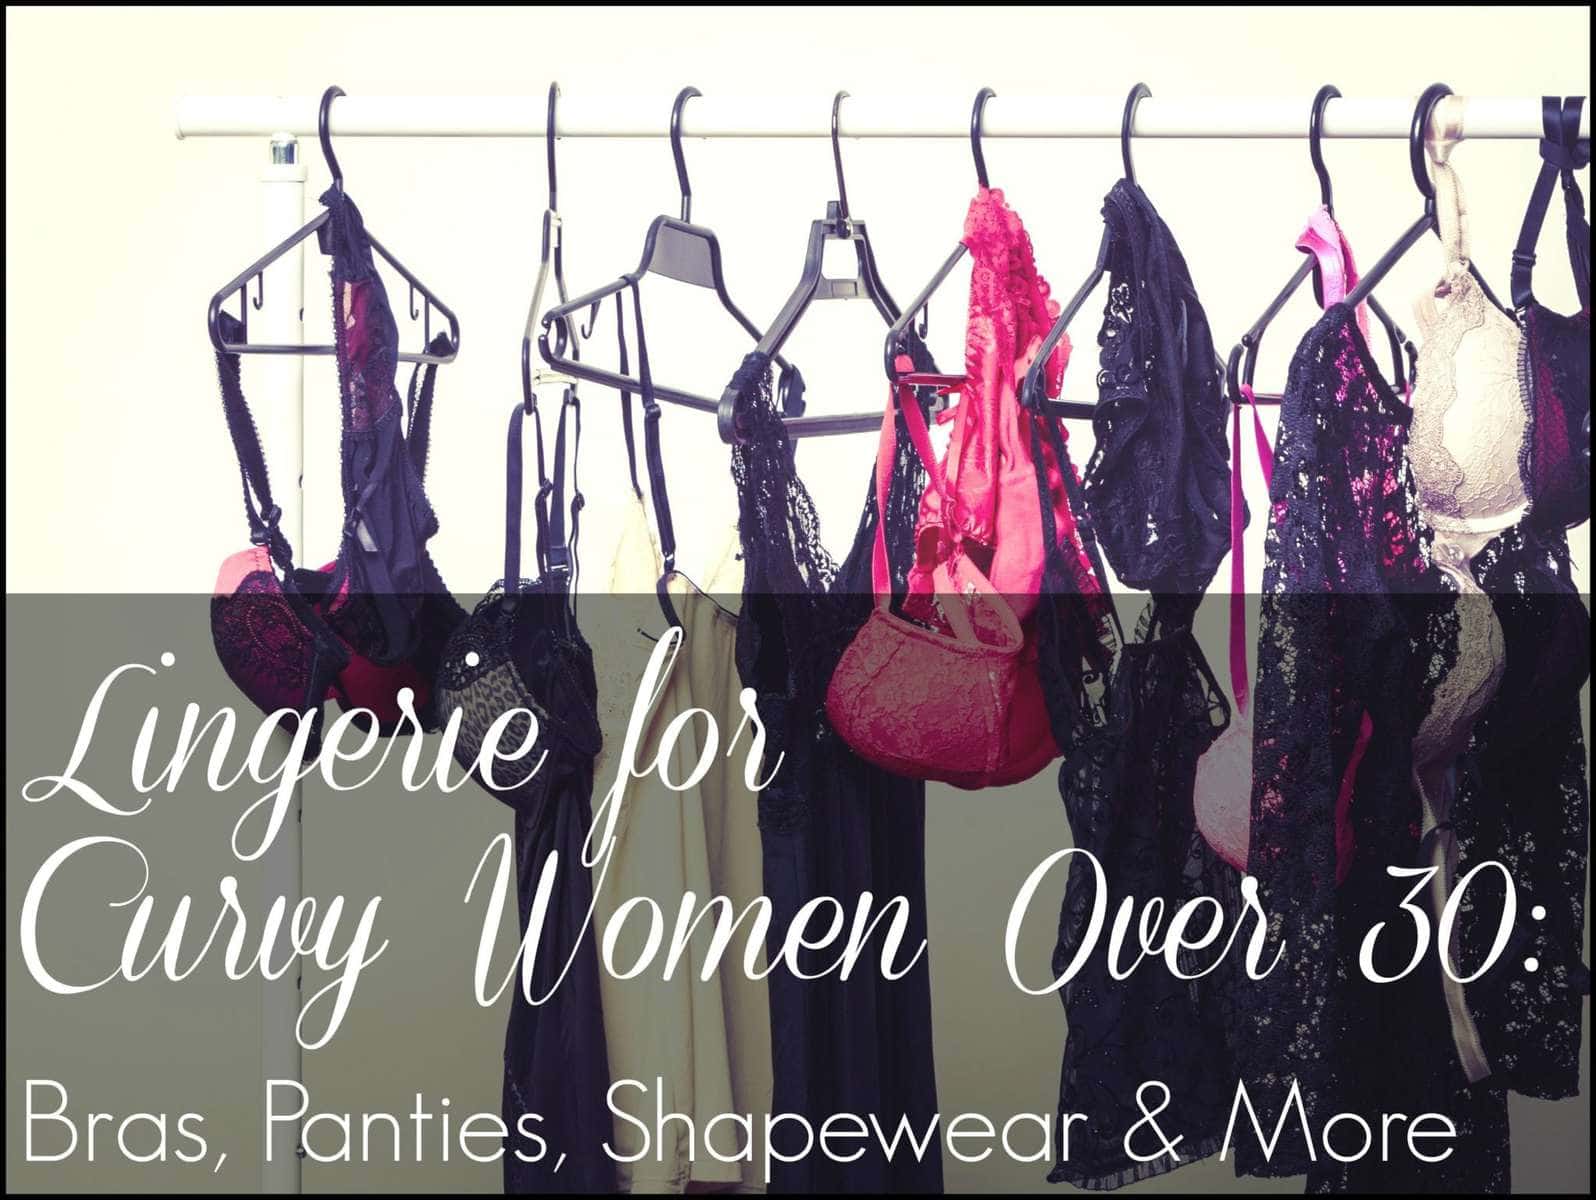 Wardrobe Oxygen: The best lingerie for curvy women and women over 30. Favorite bras, panties, shapewear, and more.